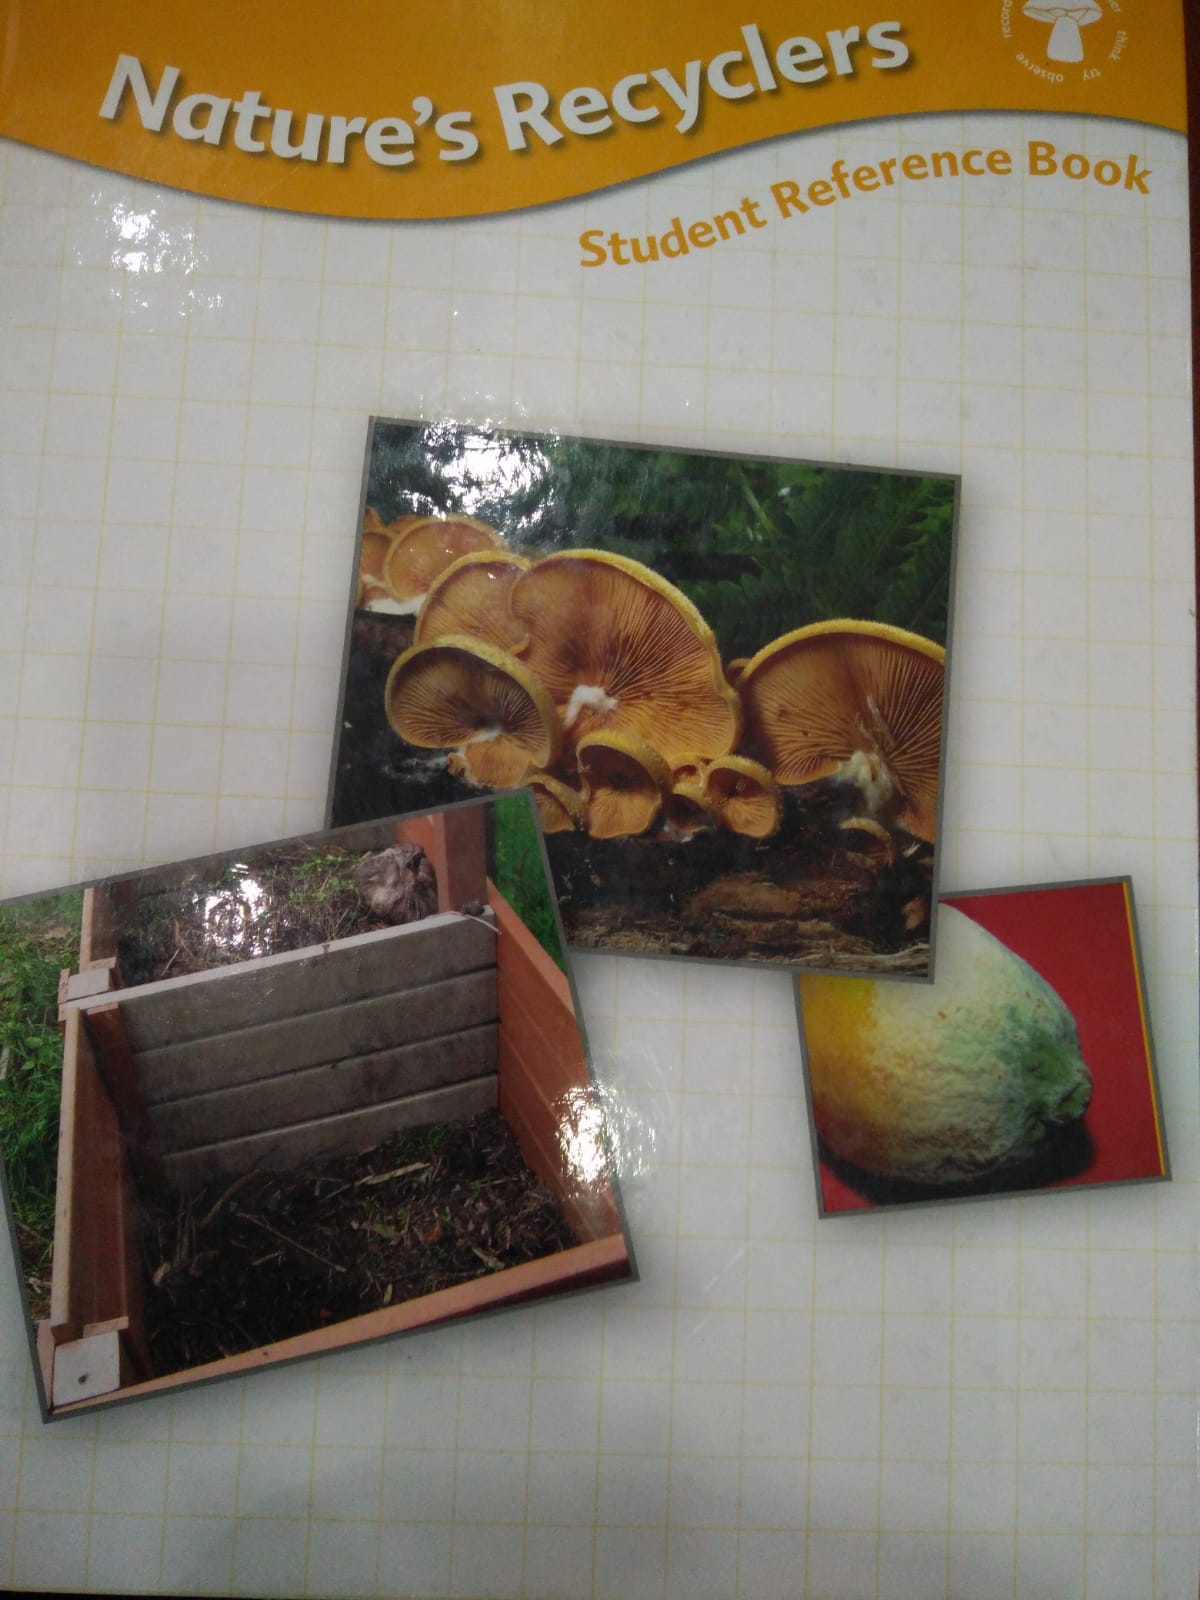 Nature's Recyclers Student Reference Book